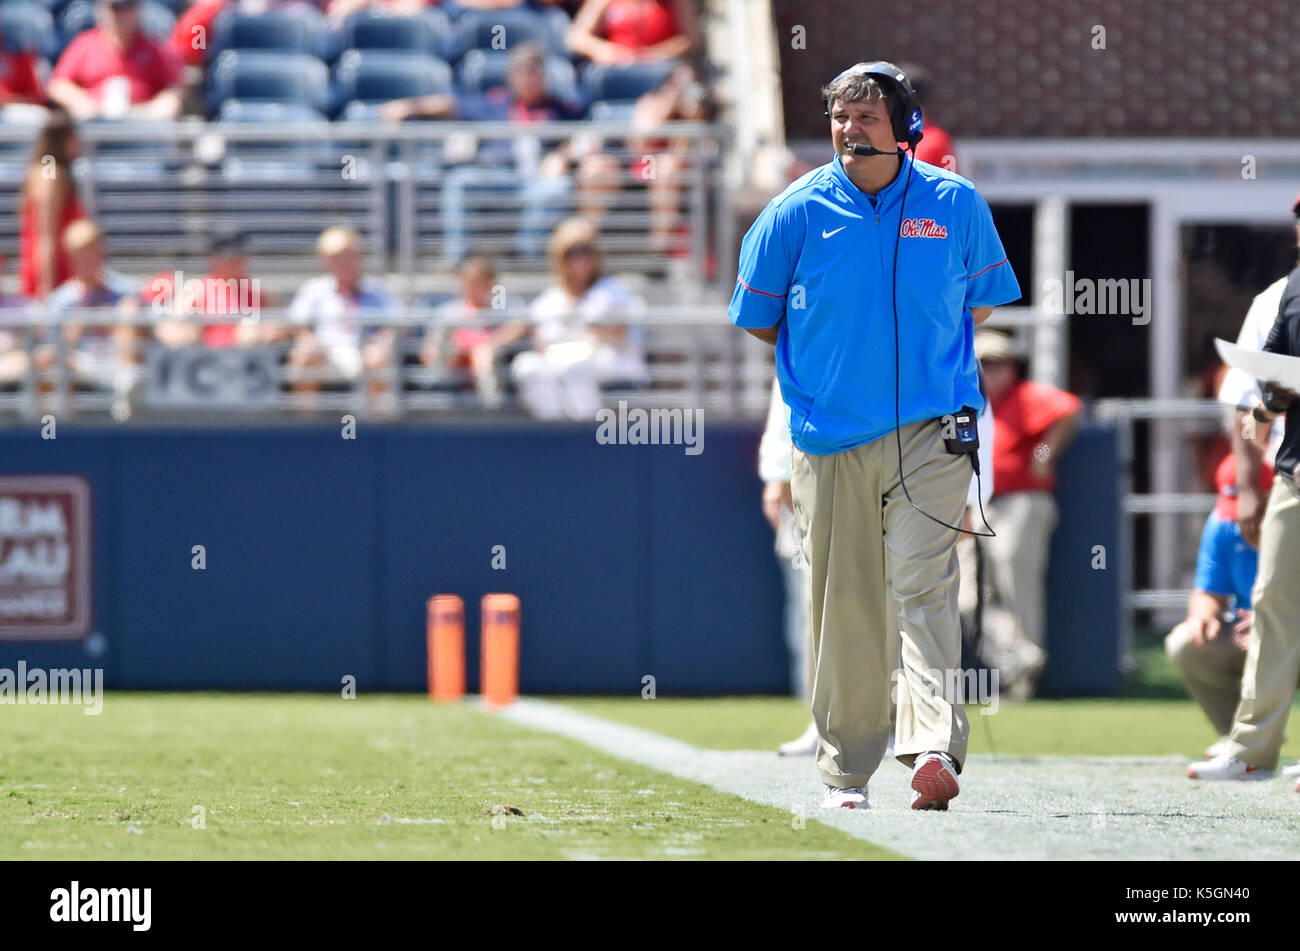 Oxford, MS, USA. 9th Sep, 2017. Mississippi coach Matt Luke walks down the sidelines during the second quarter of a NCAA college football game against Tennessee-Martin at Vaught-Hemmingway Stadium in Oxford, MS. Mississippi won 45-23. Austin McAfee/CSM/Alamy Live News Stock Photo